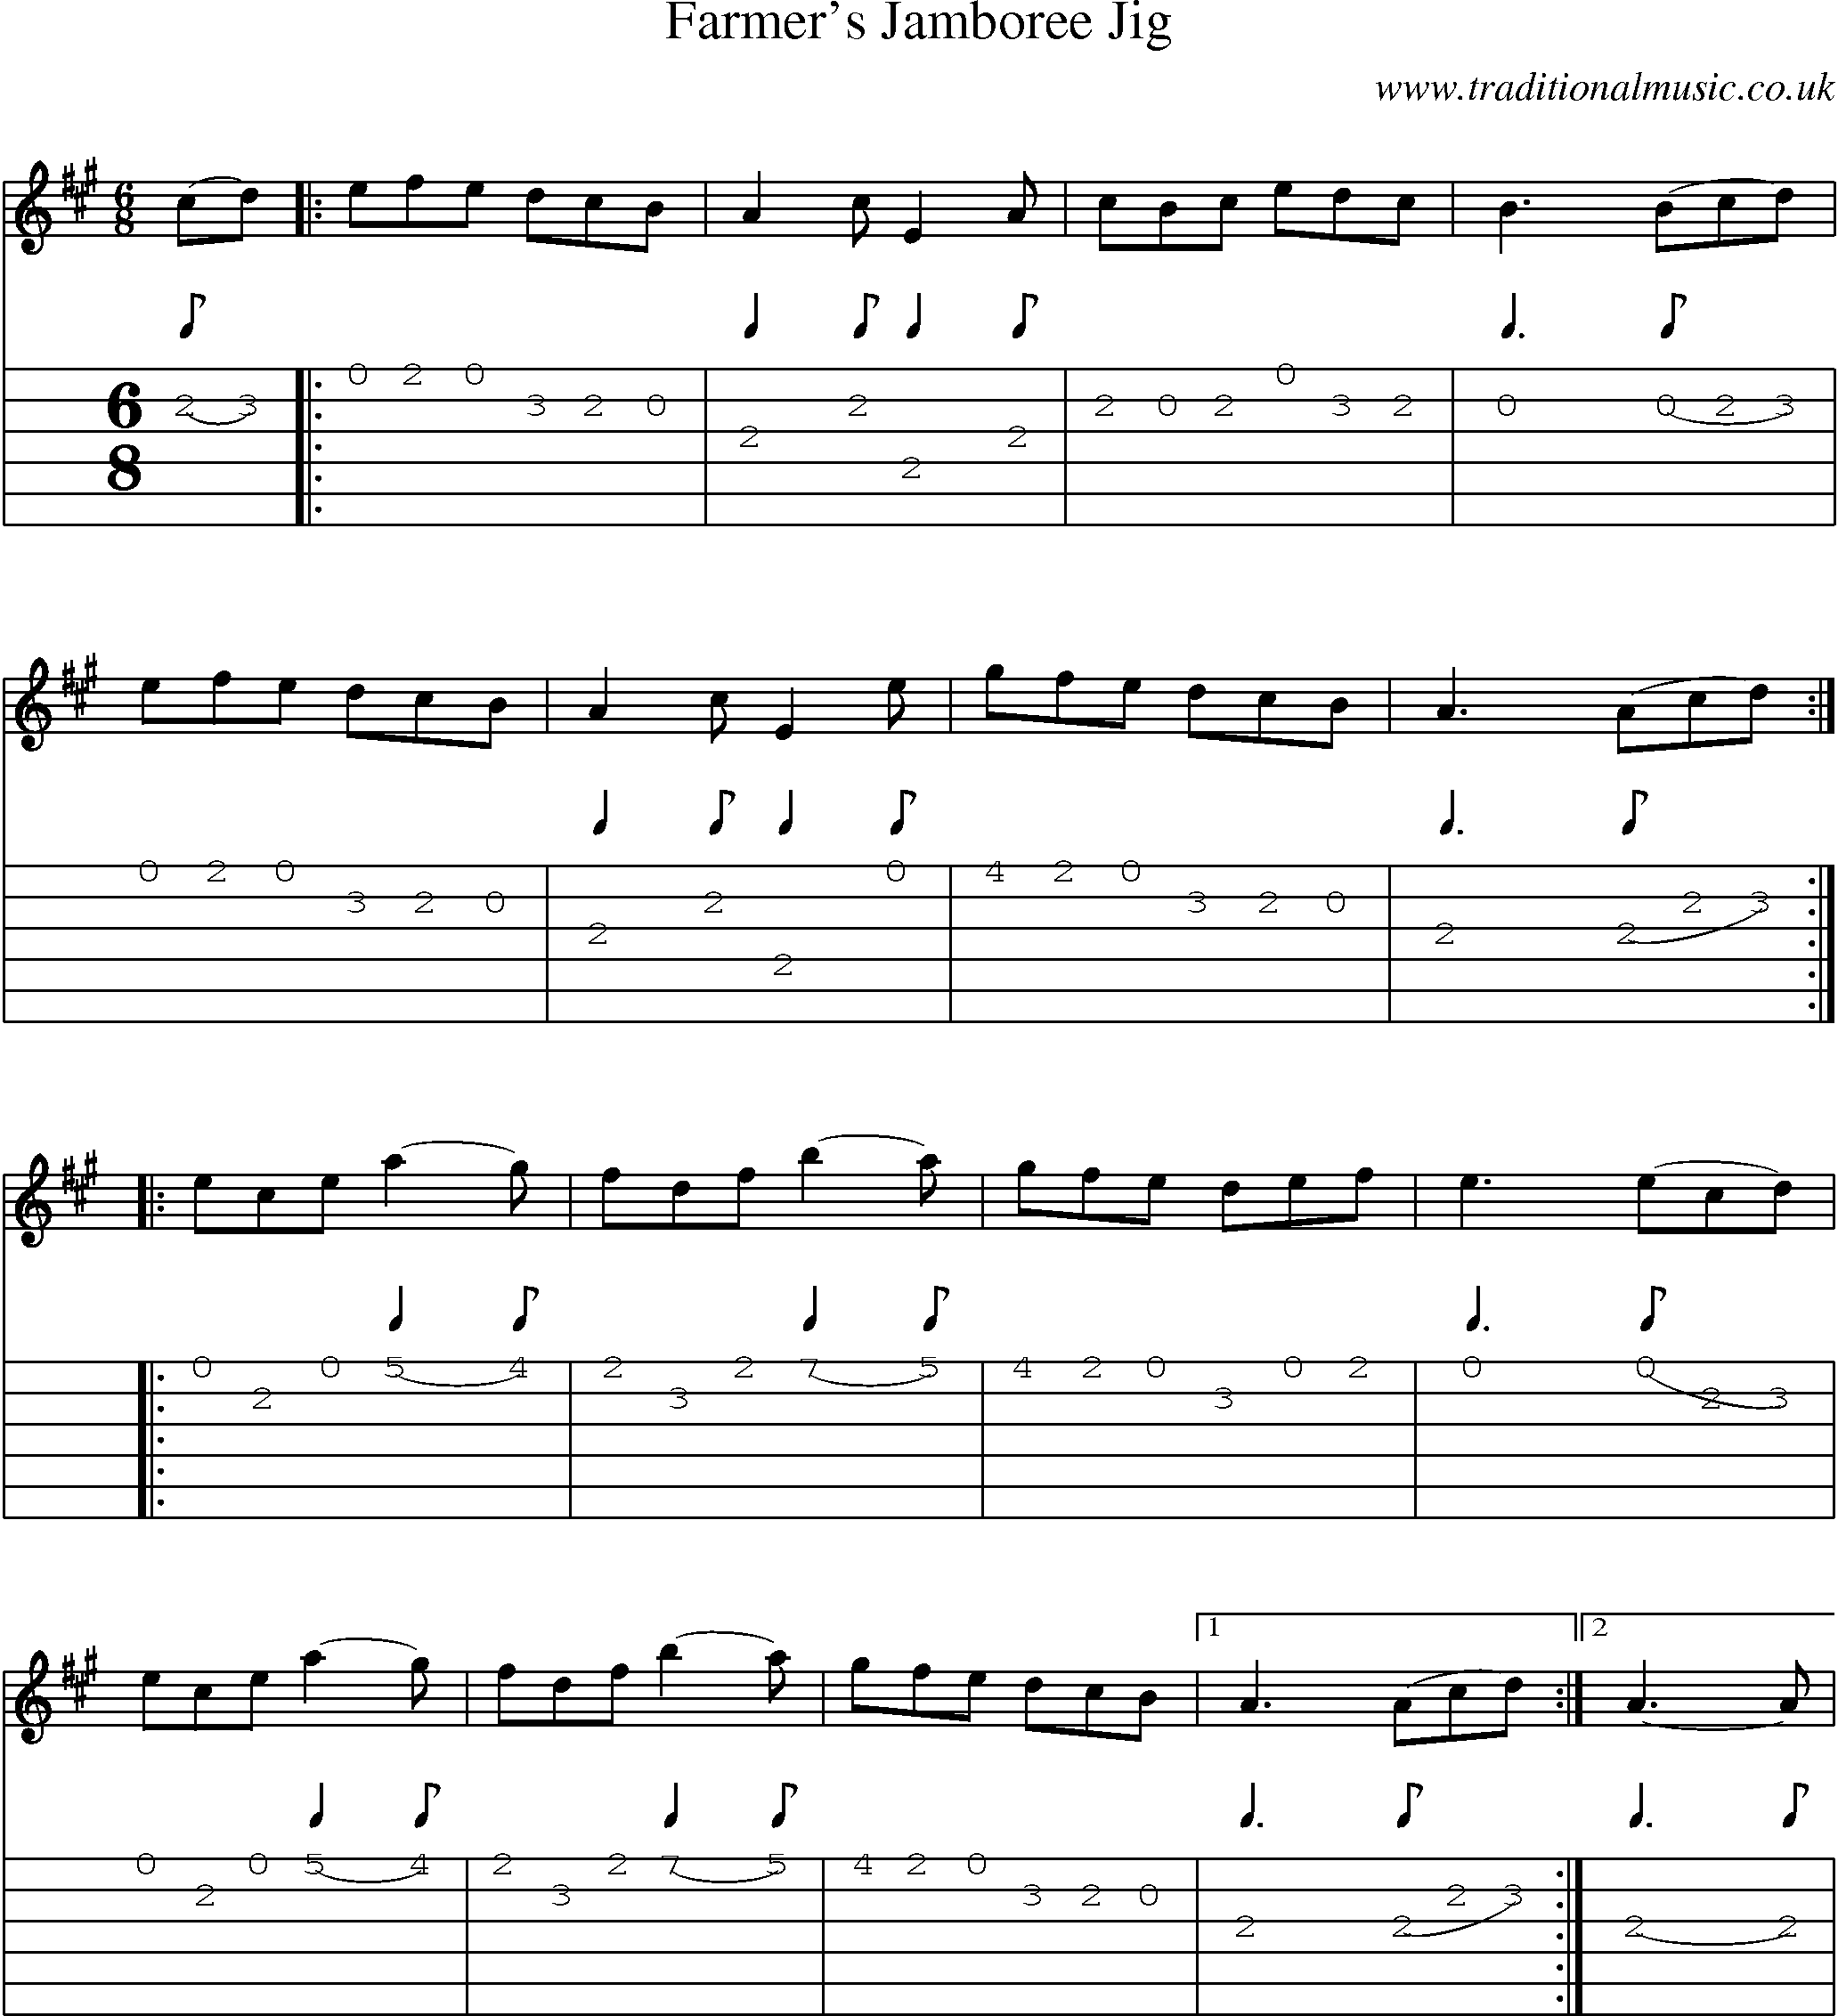 Music Score and Guitar Tabs for Farmers Jamboree Jig